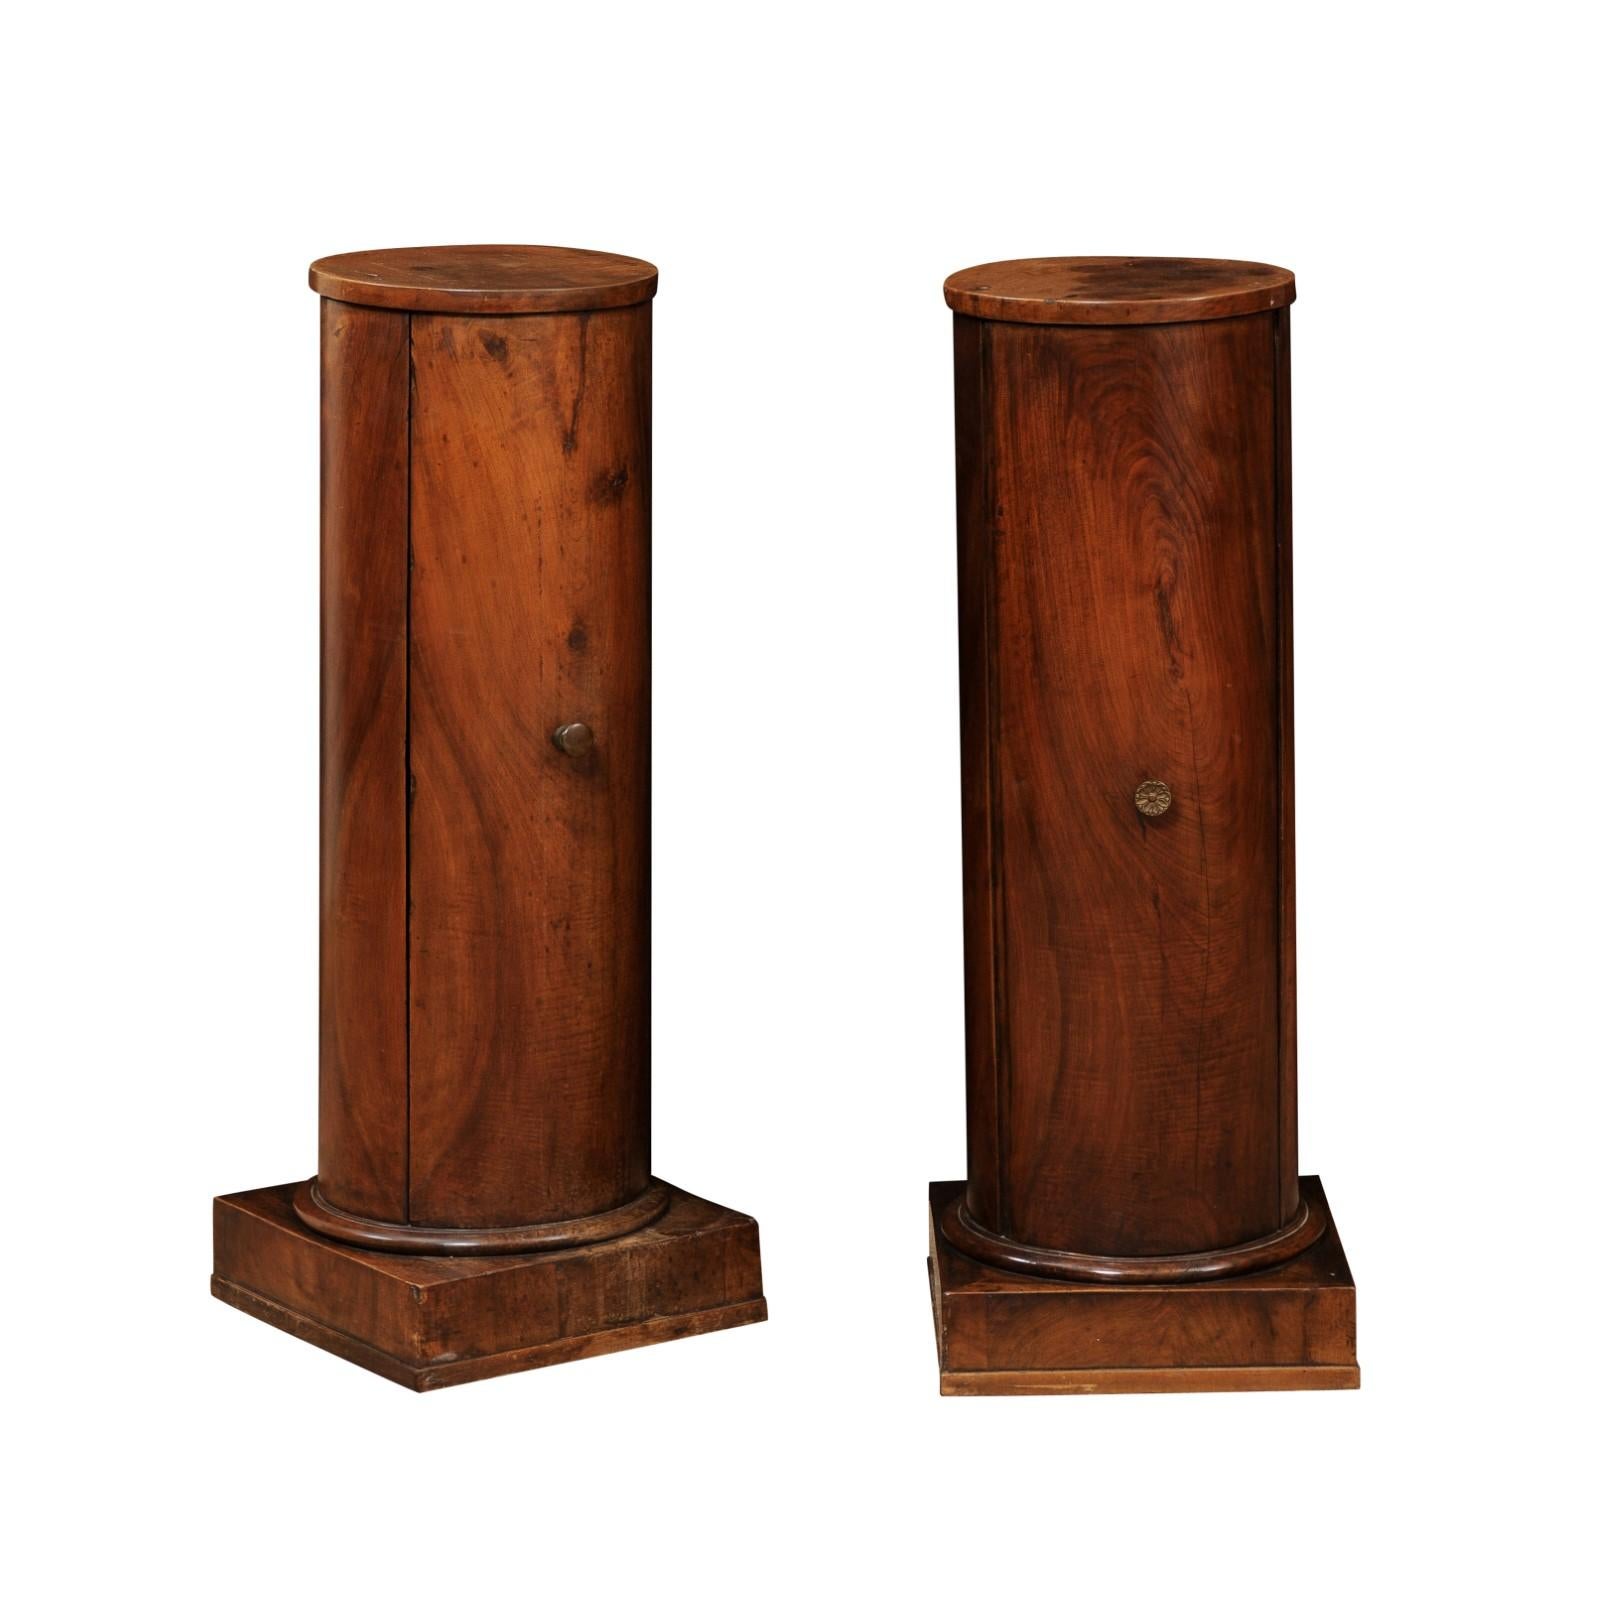 Pair of Early 19th Century Italian Neoclassical Walnut Pedestal Cabinets In Good Condition For Sale In Atlanta, GA